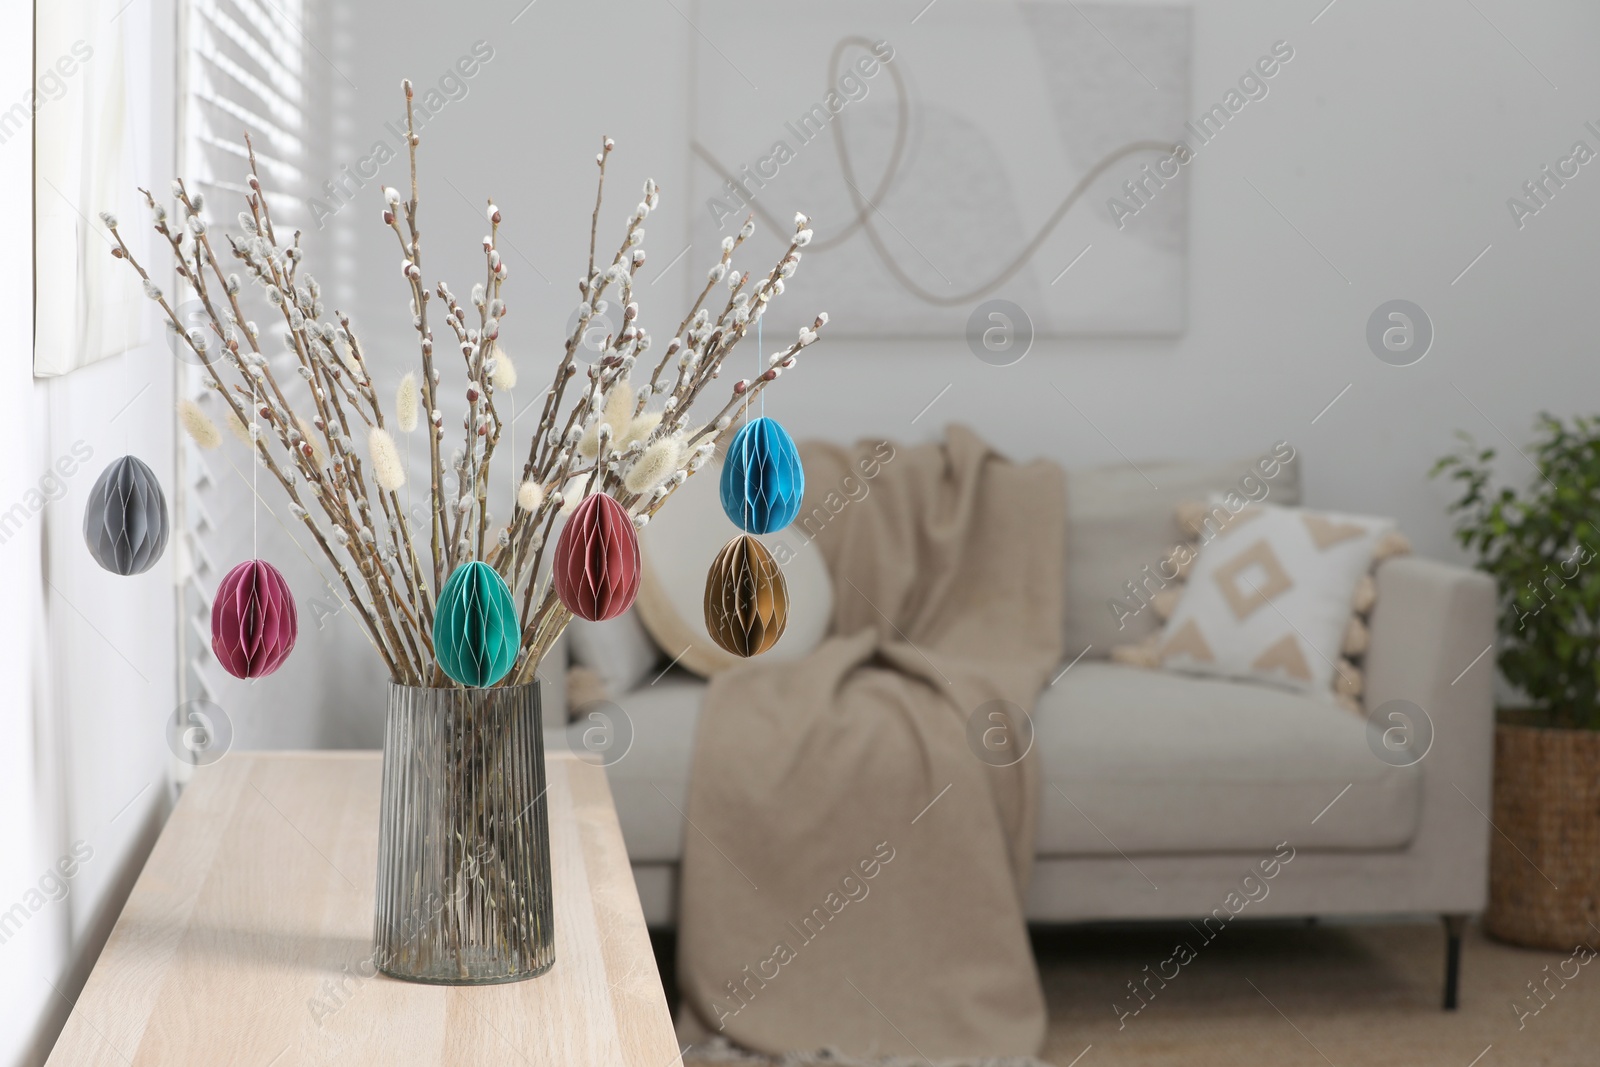 Photo of Beautiful pussy willow branches with paper eggs in vase on wooden table at home, space for text. Easter decor